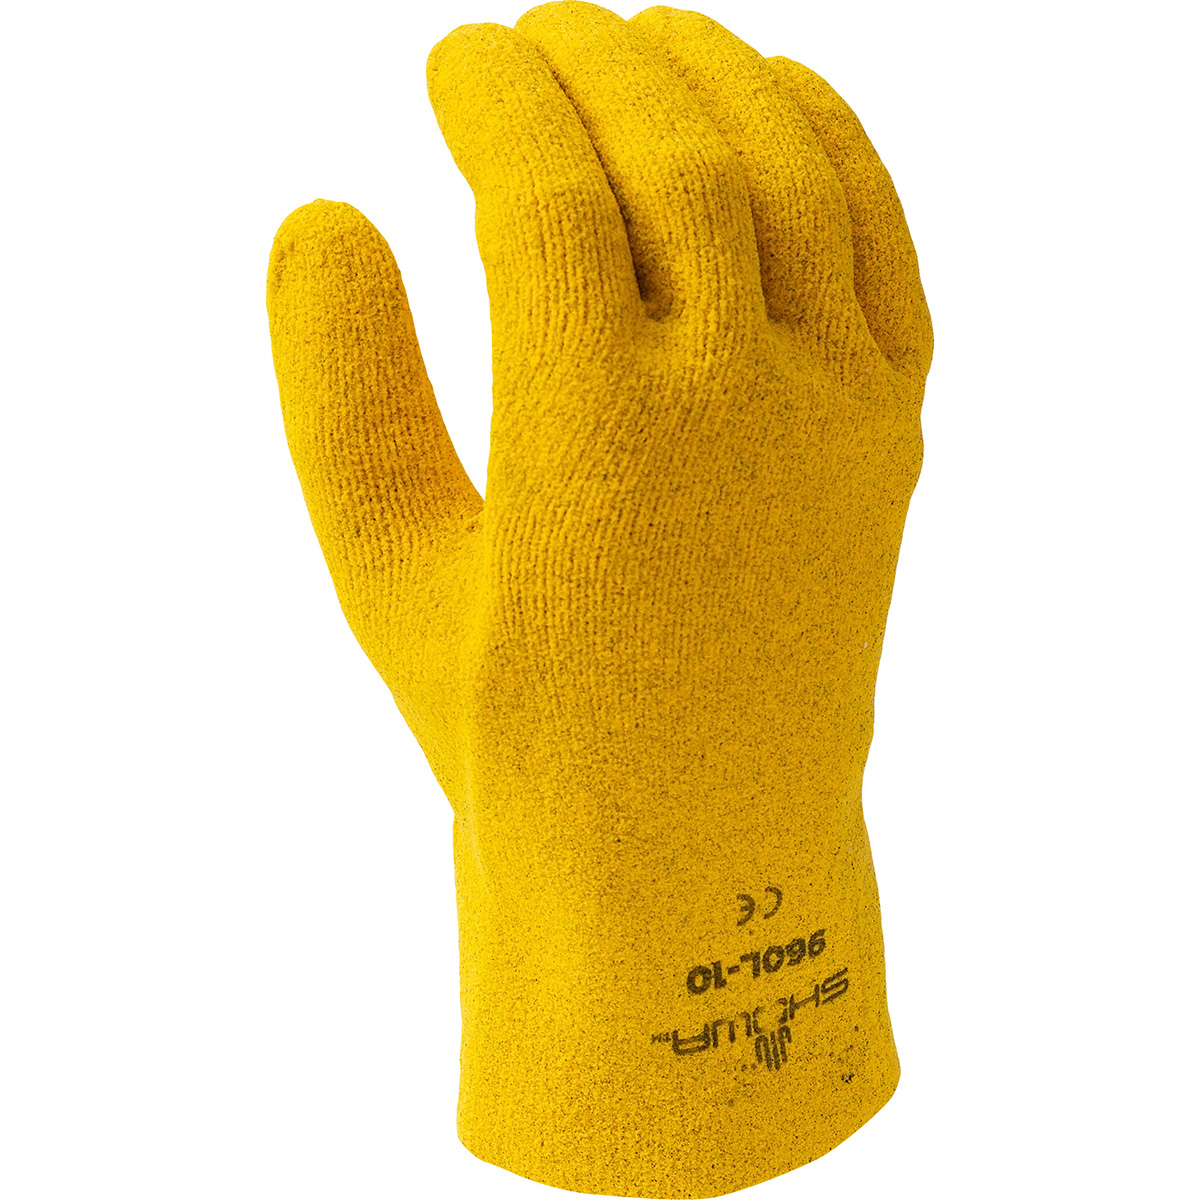 General purpose PVC fully coated, yellow, seam-free liner, slip-on, small